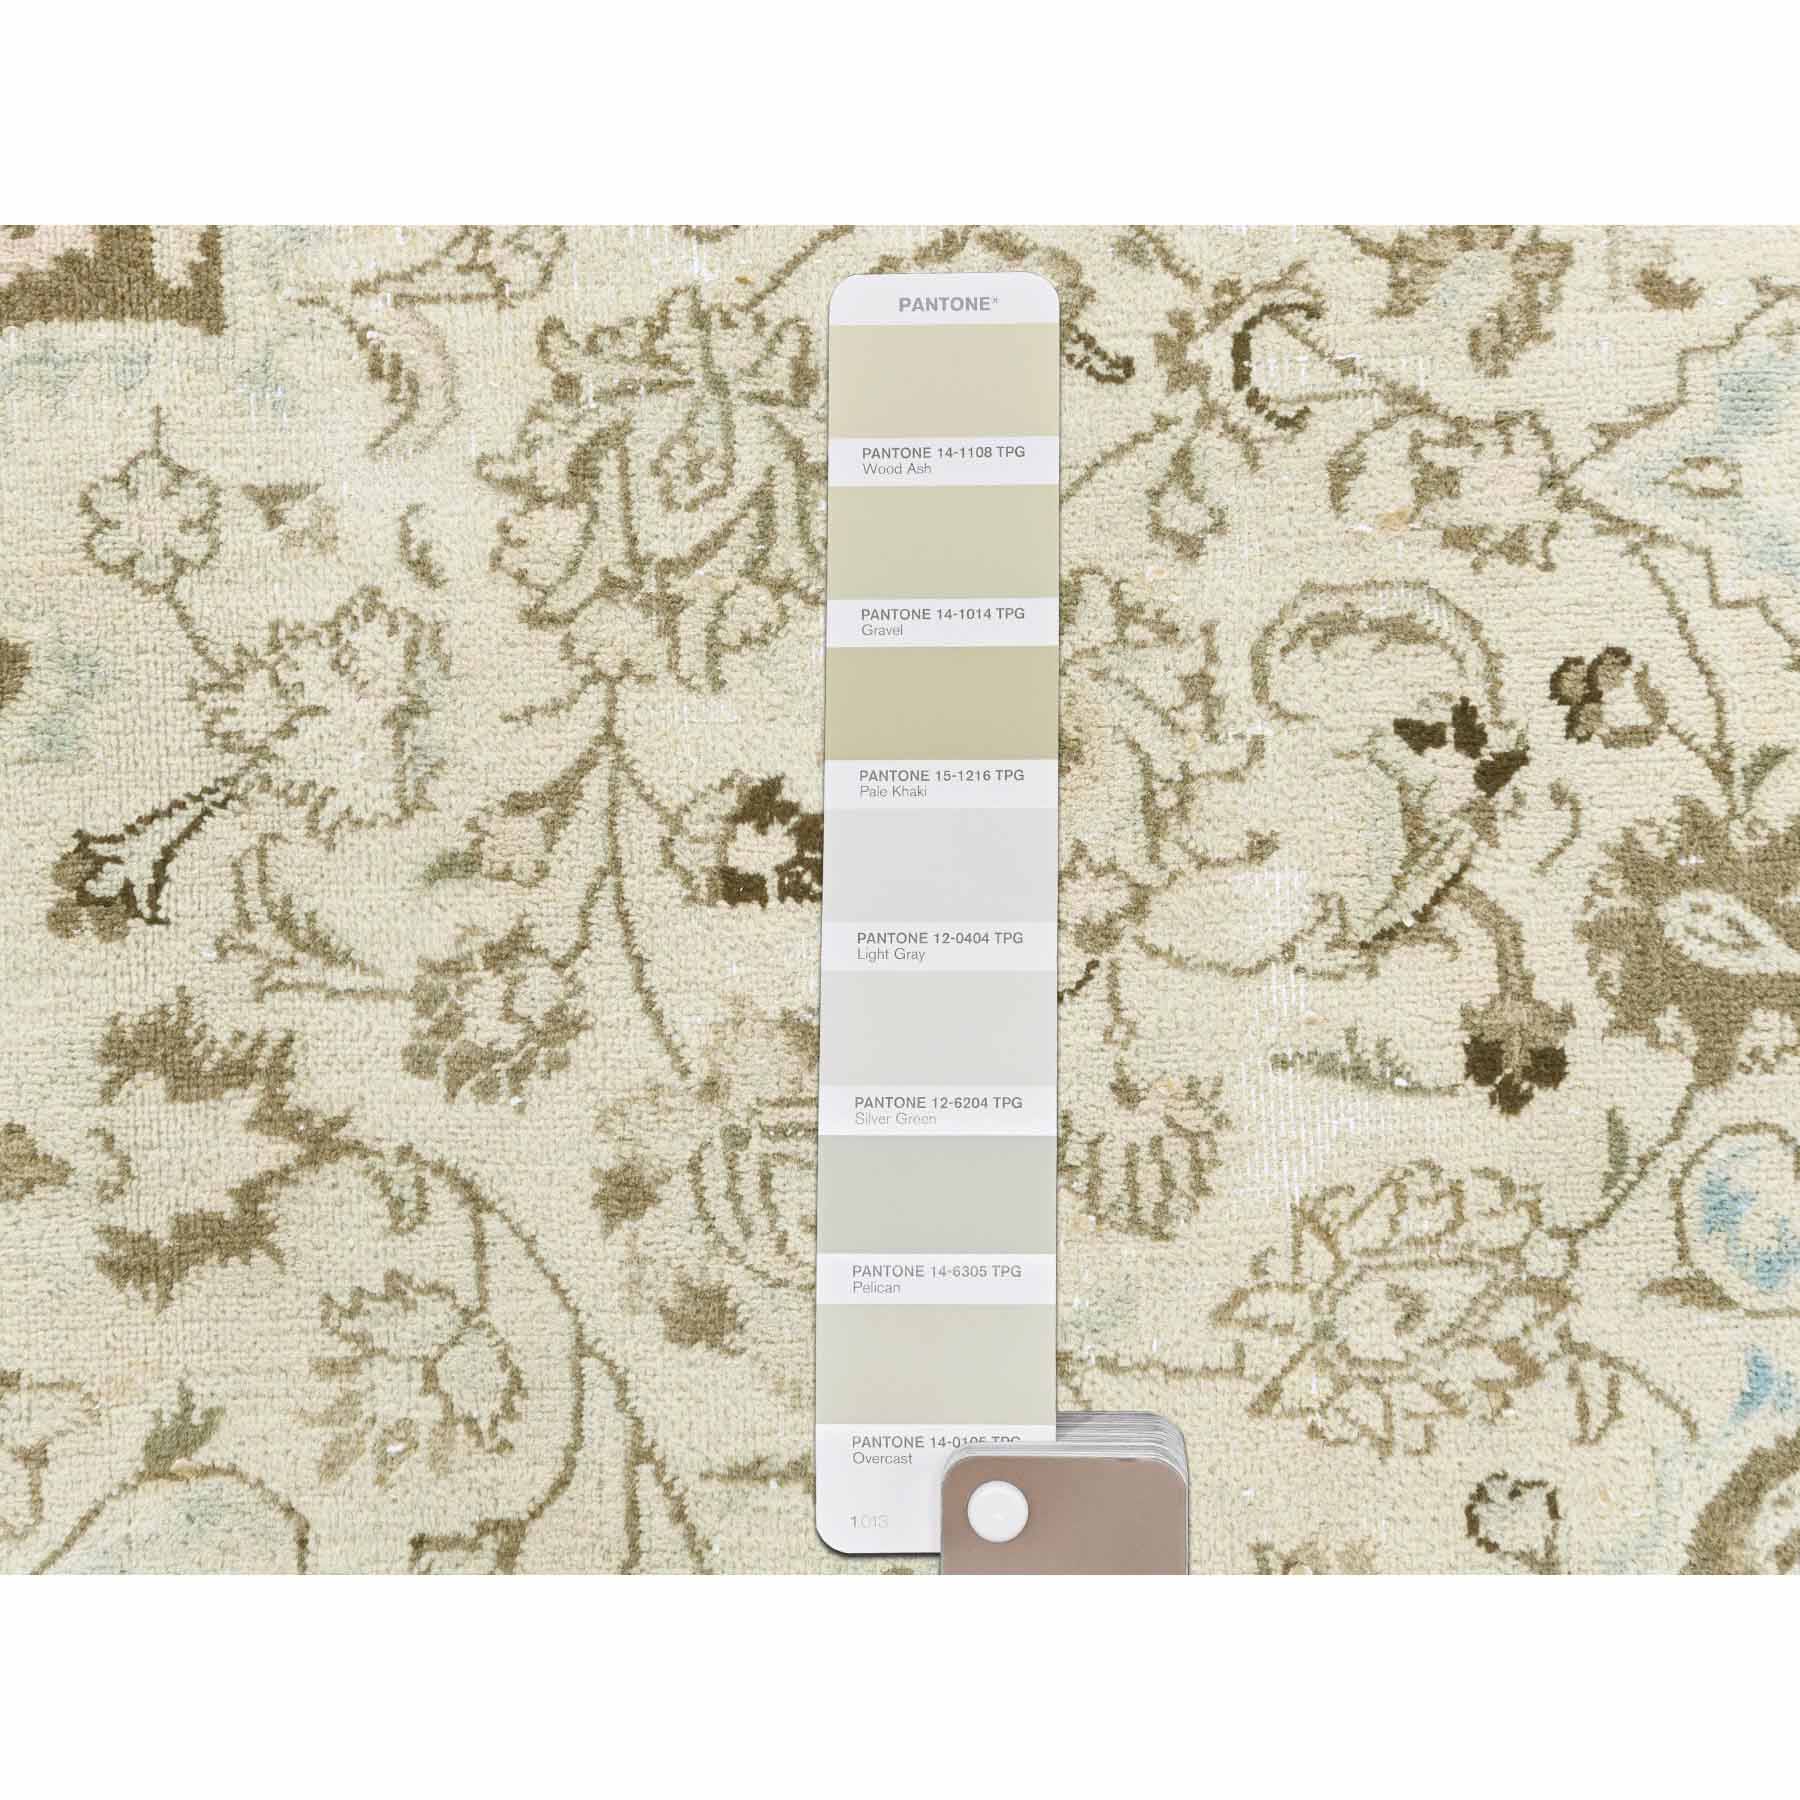 Overdyed-Vintage-Hand-Knotted-Rug-307515